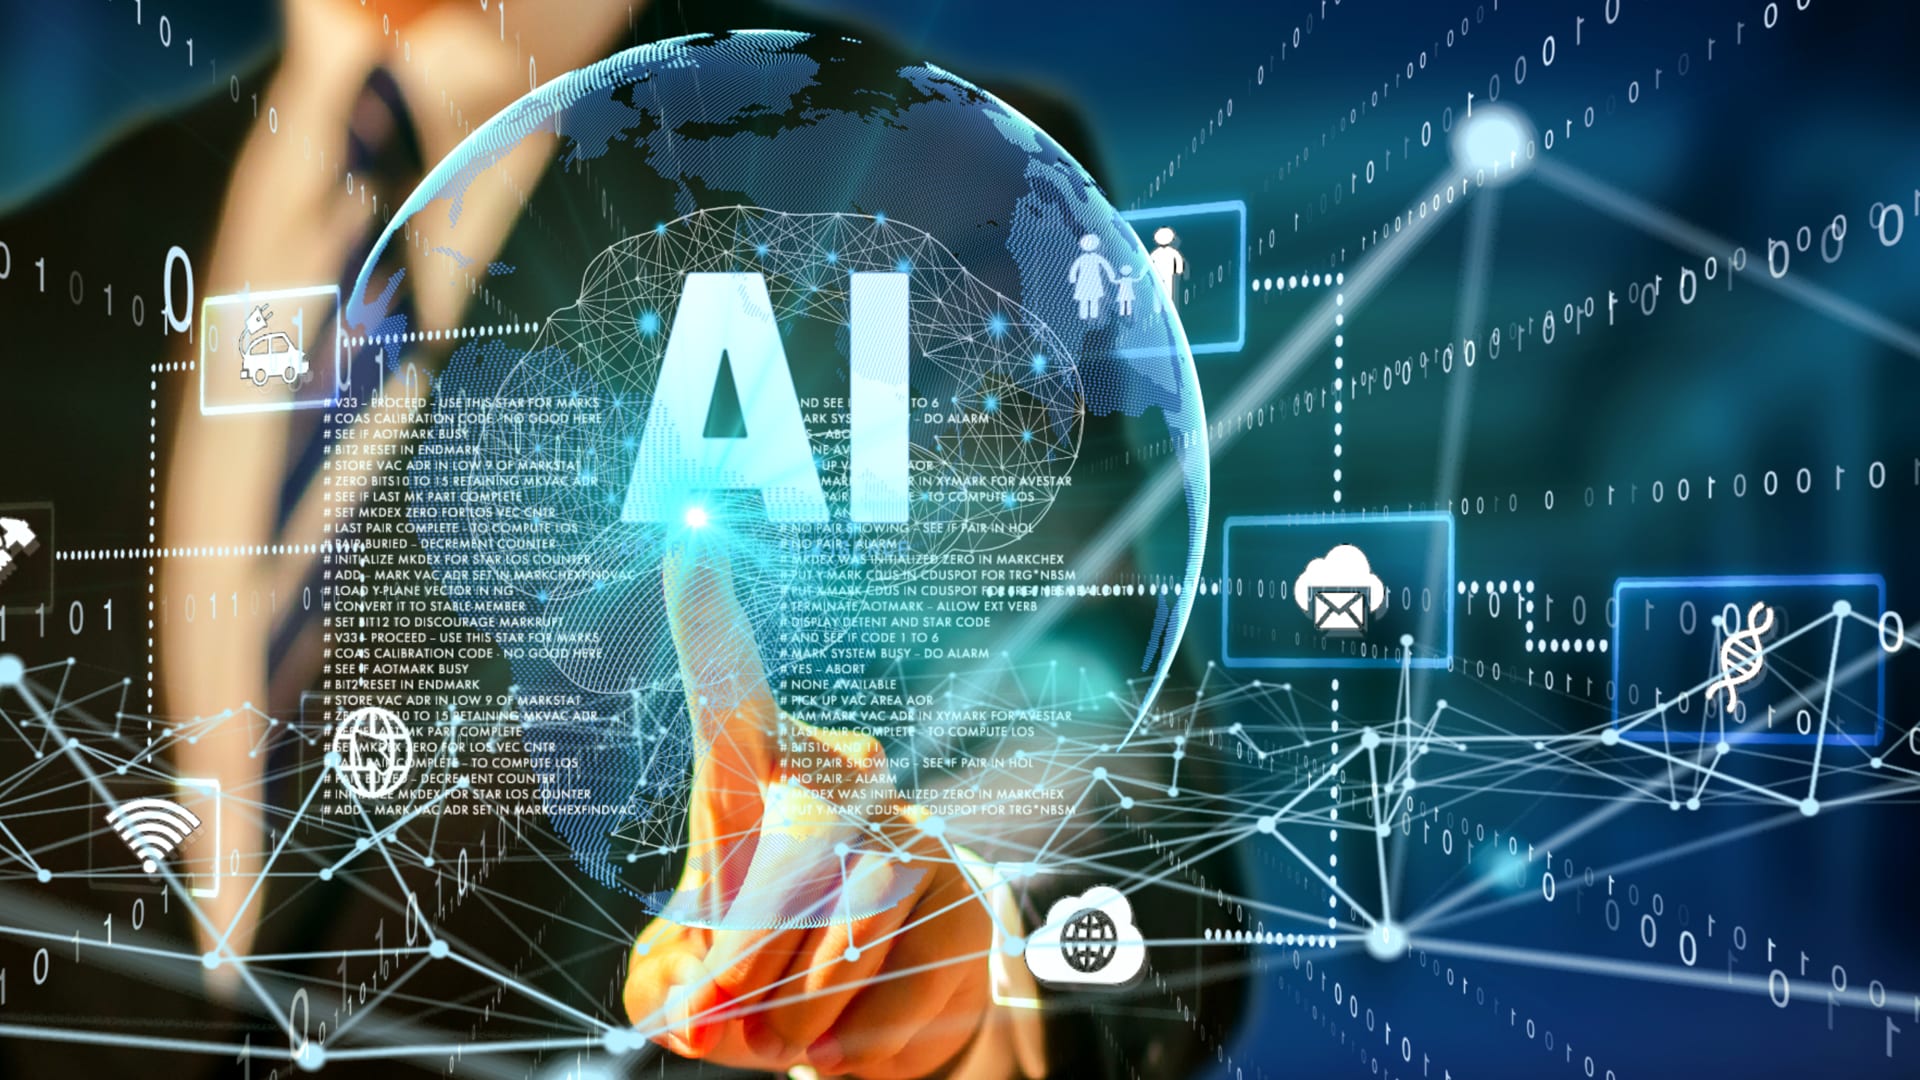 Adoption of artificial intelligence can add 1.4 pc points to India's GDP growth: IIM-A study